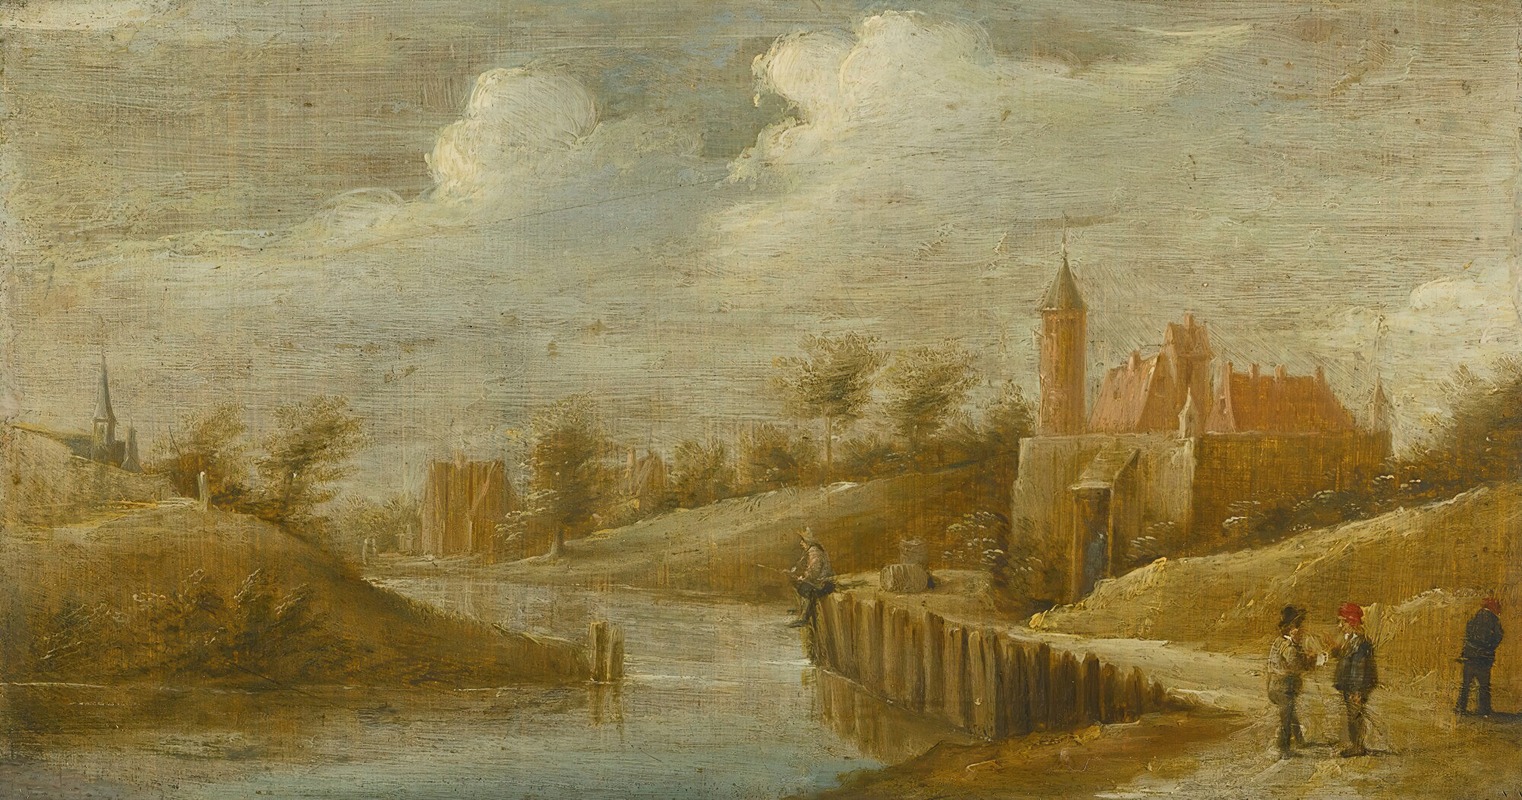 Follower of David Teniers the Younger - A Landscape With A Castle By A Small River